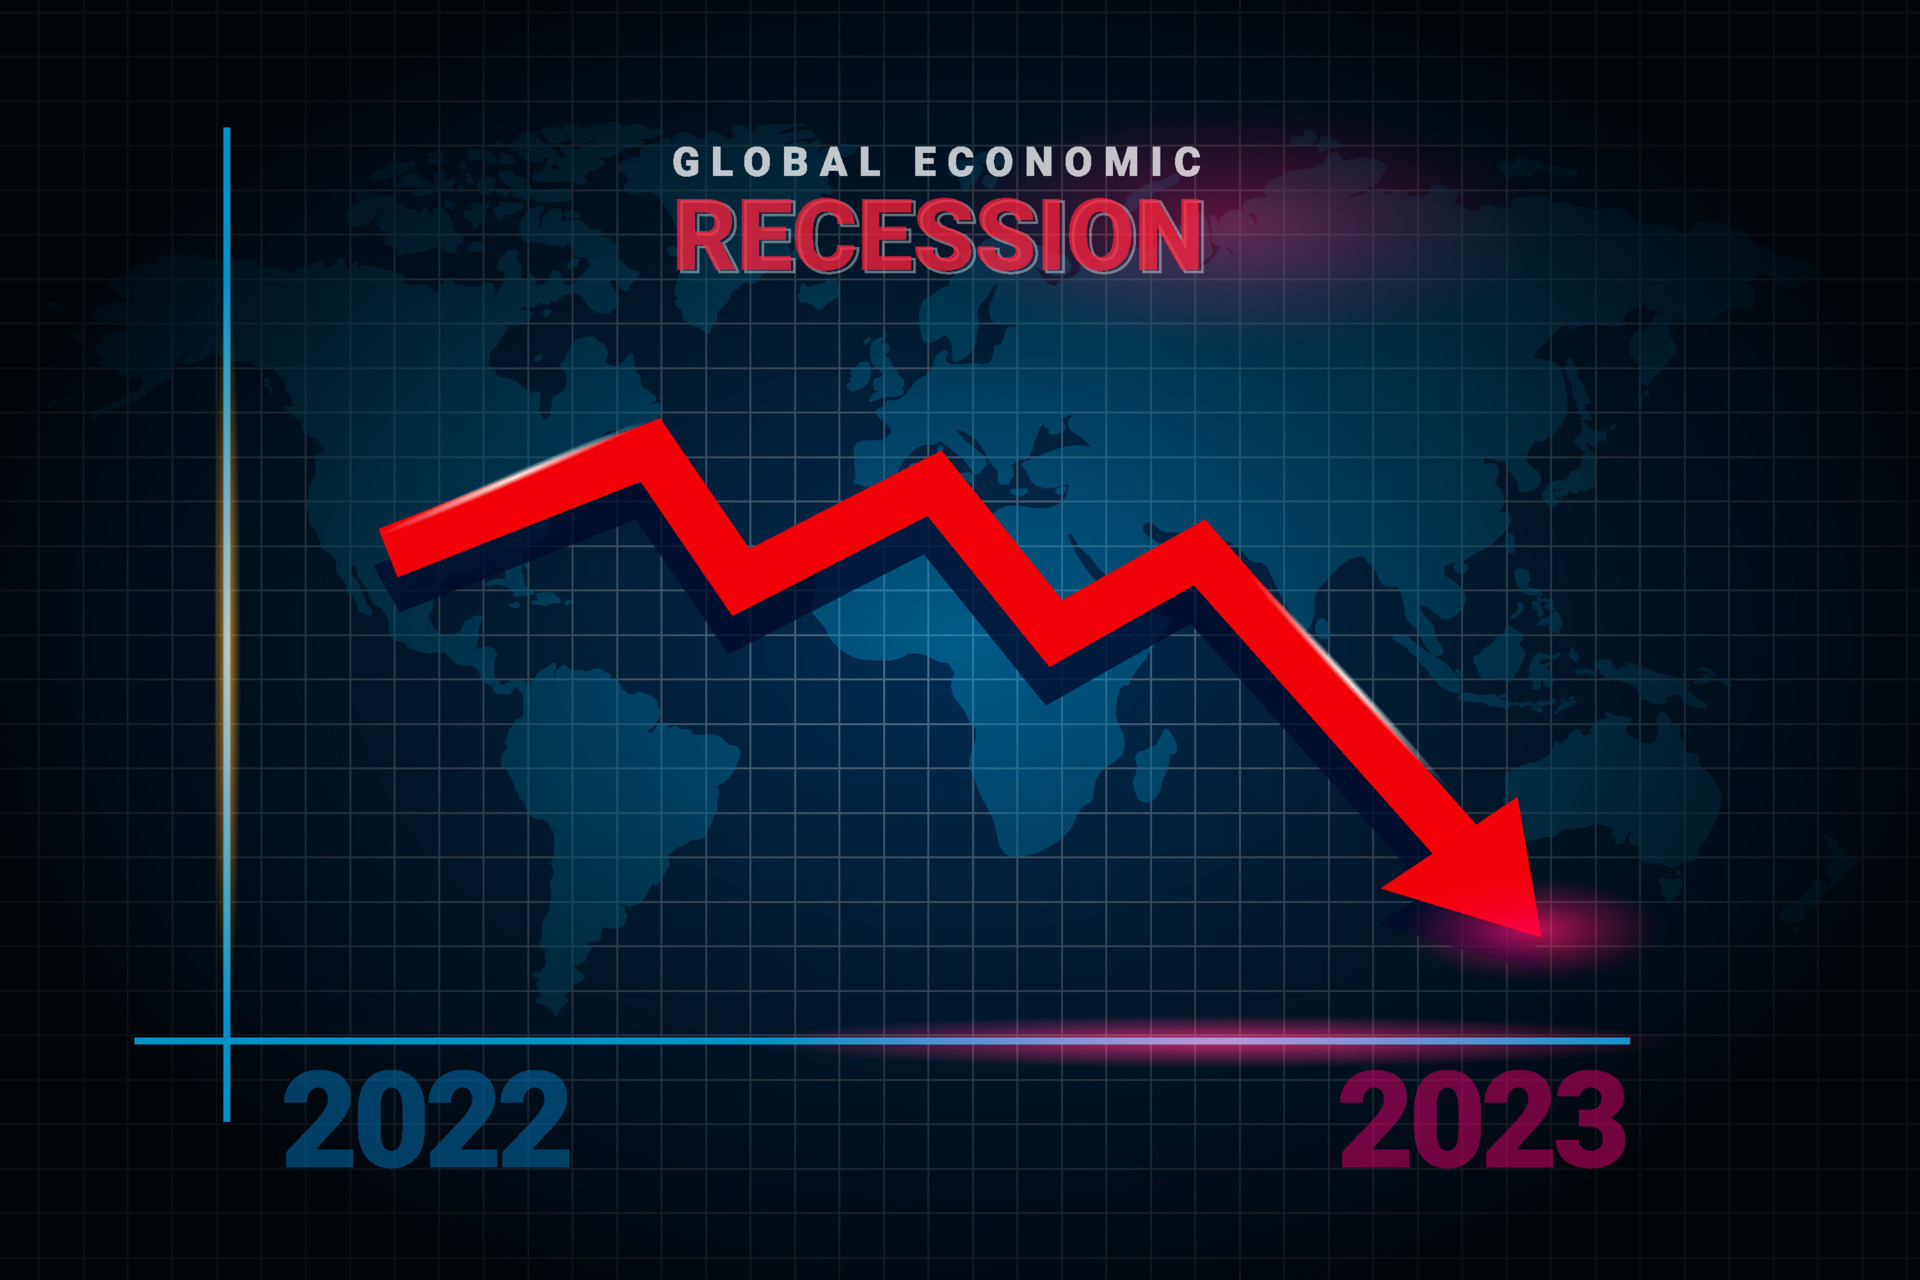 2023 Economy recession, global business downfall with falling arrow and